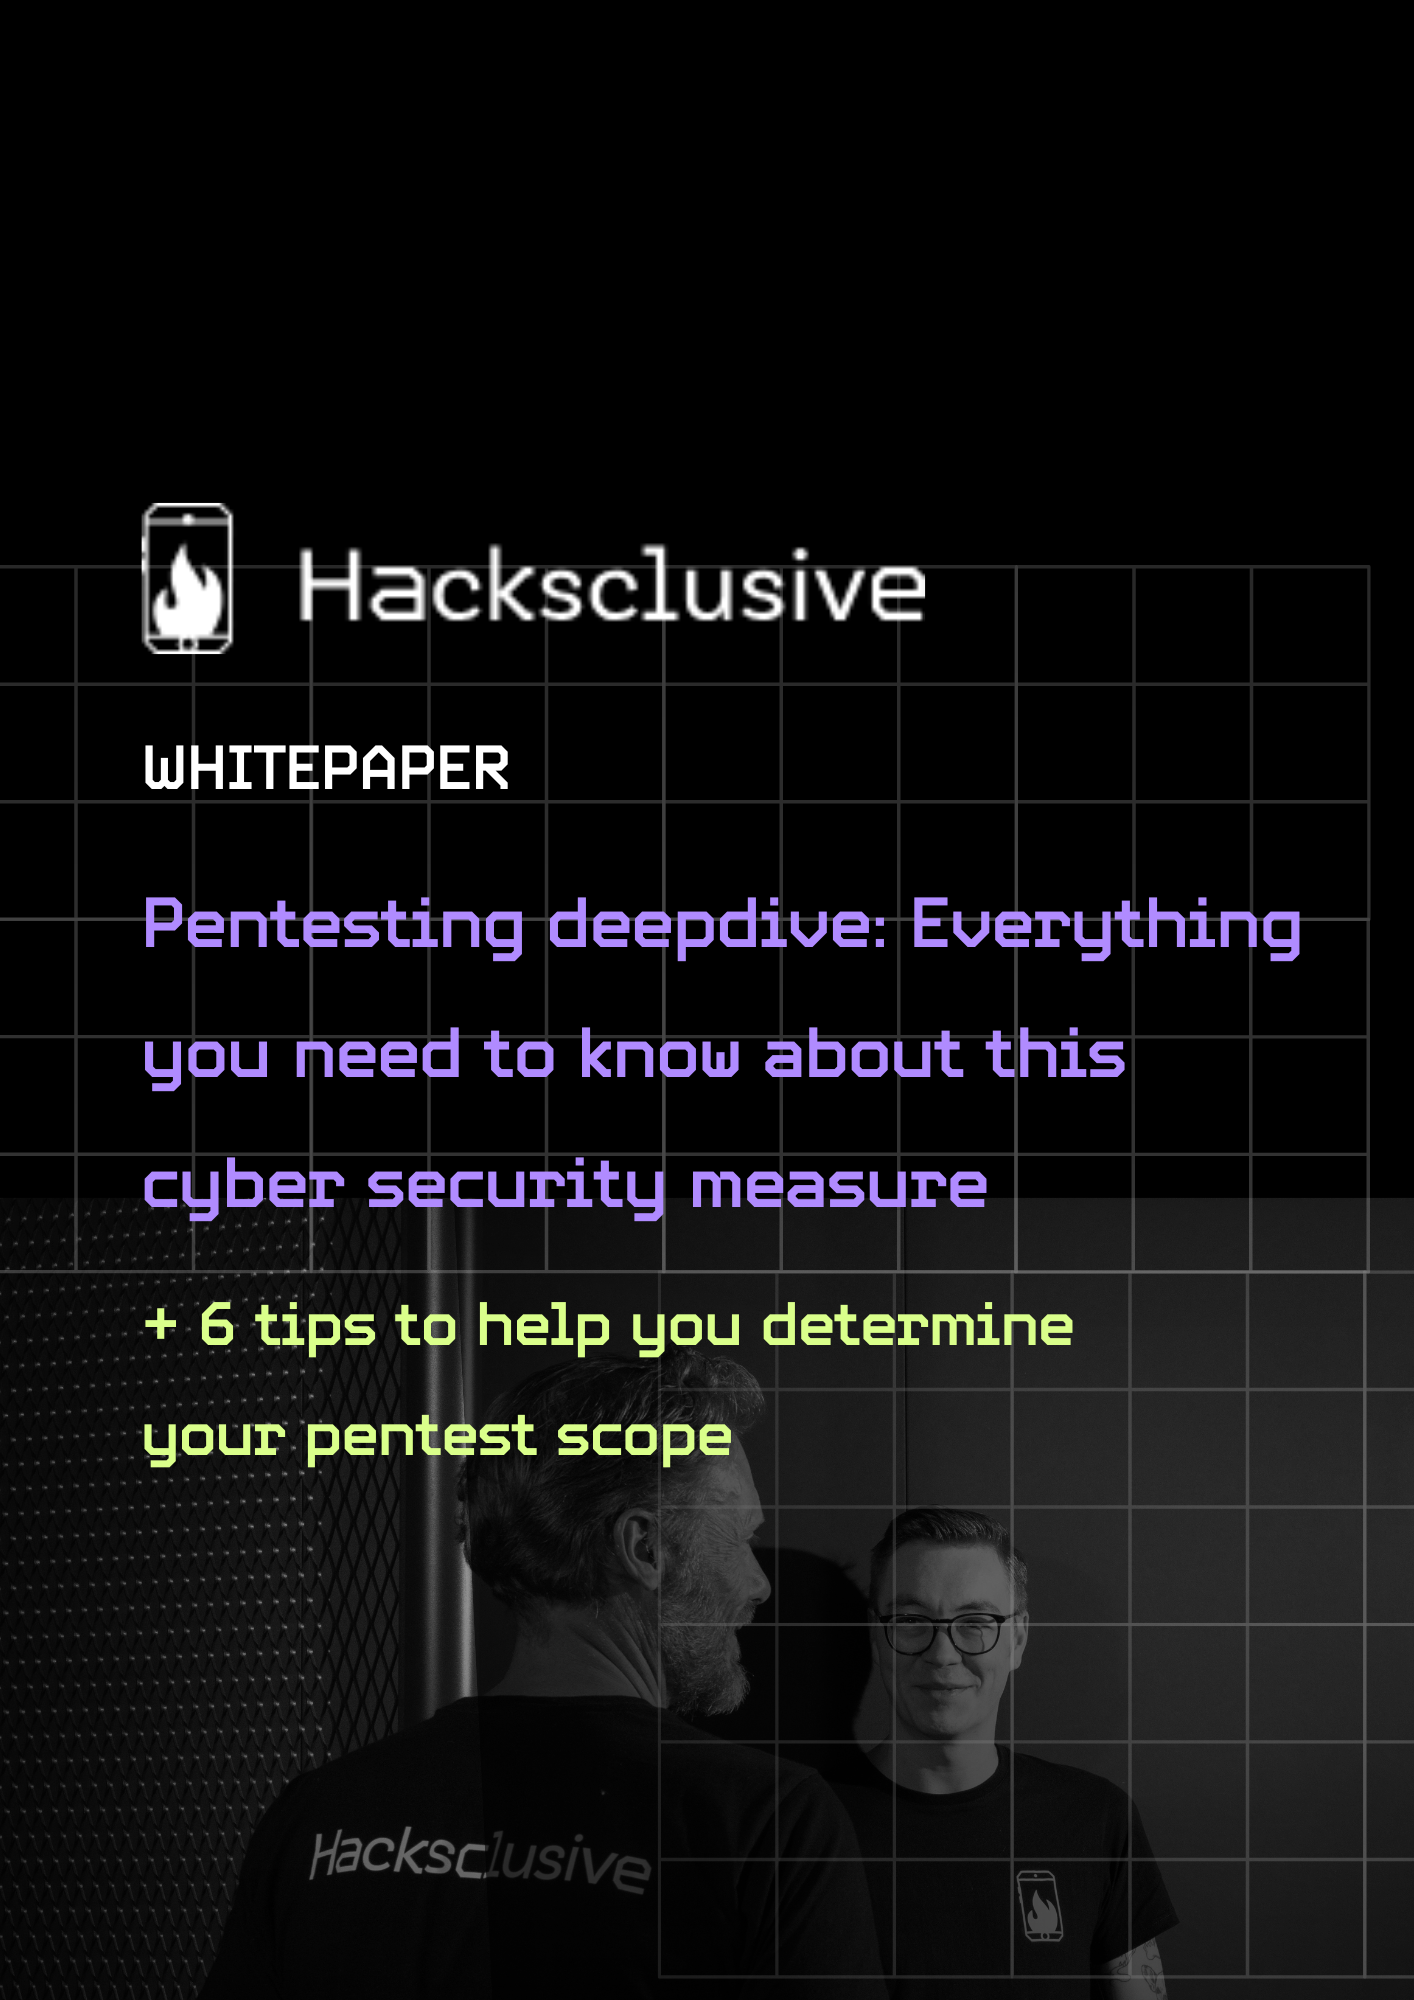 Hacksclusive Whitepaper Pentesting Deepdive: everything you need to know about pentesting